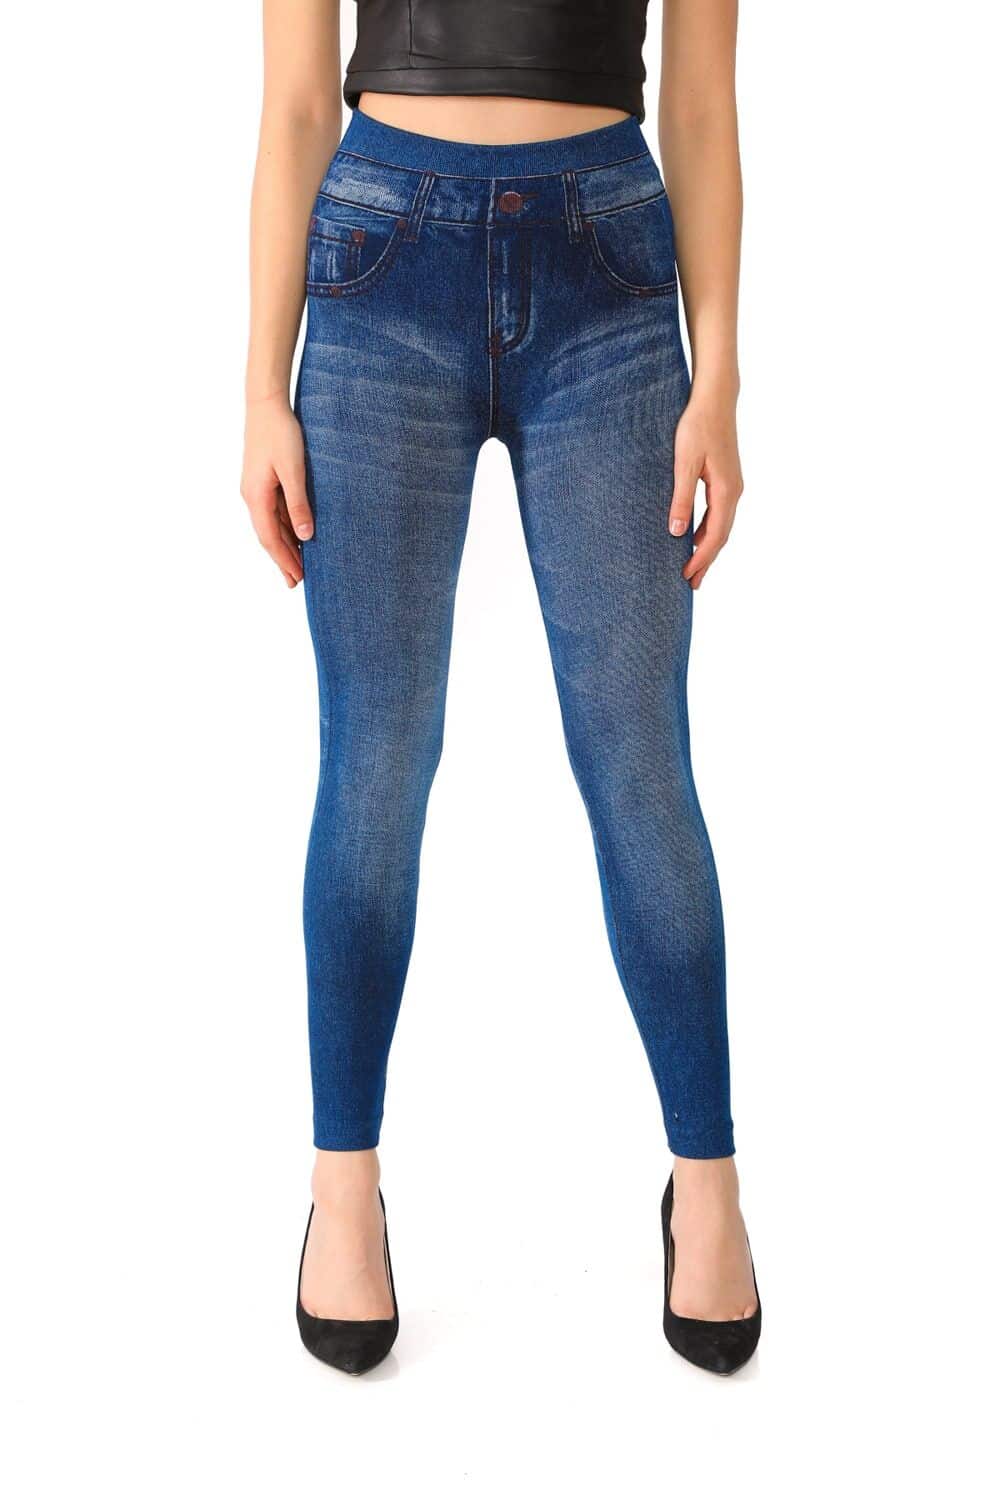 Denim Leggings with Fake Pockets and Buttons Pattern - Its All